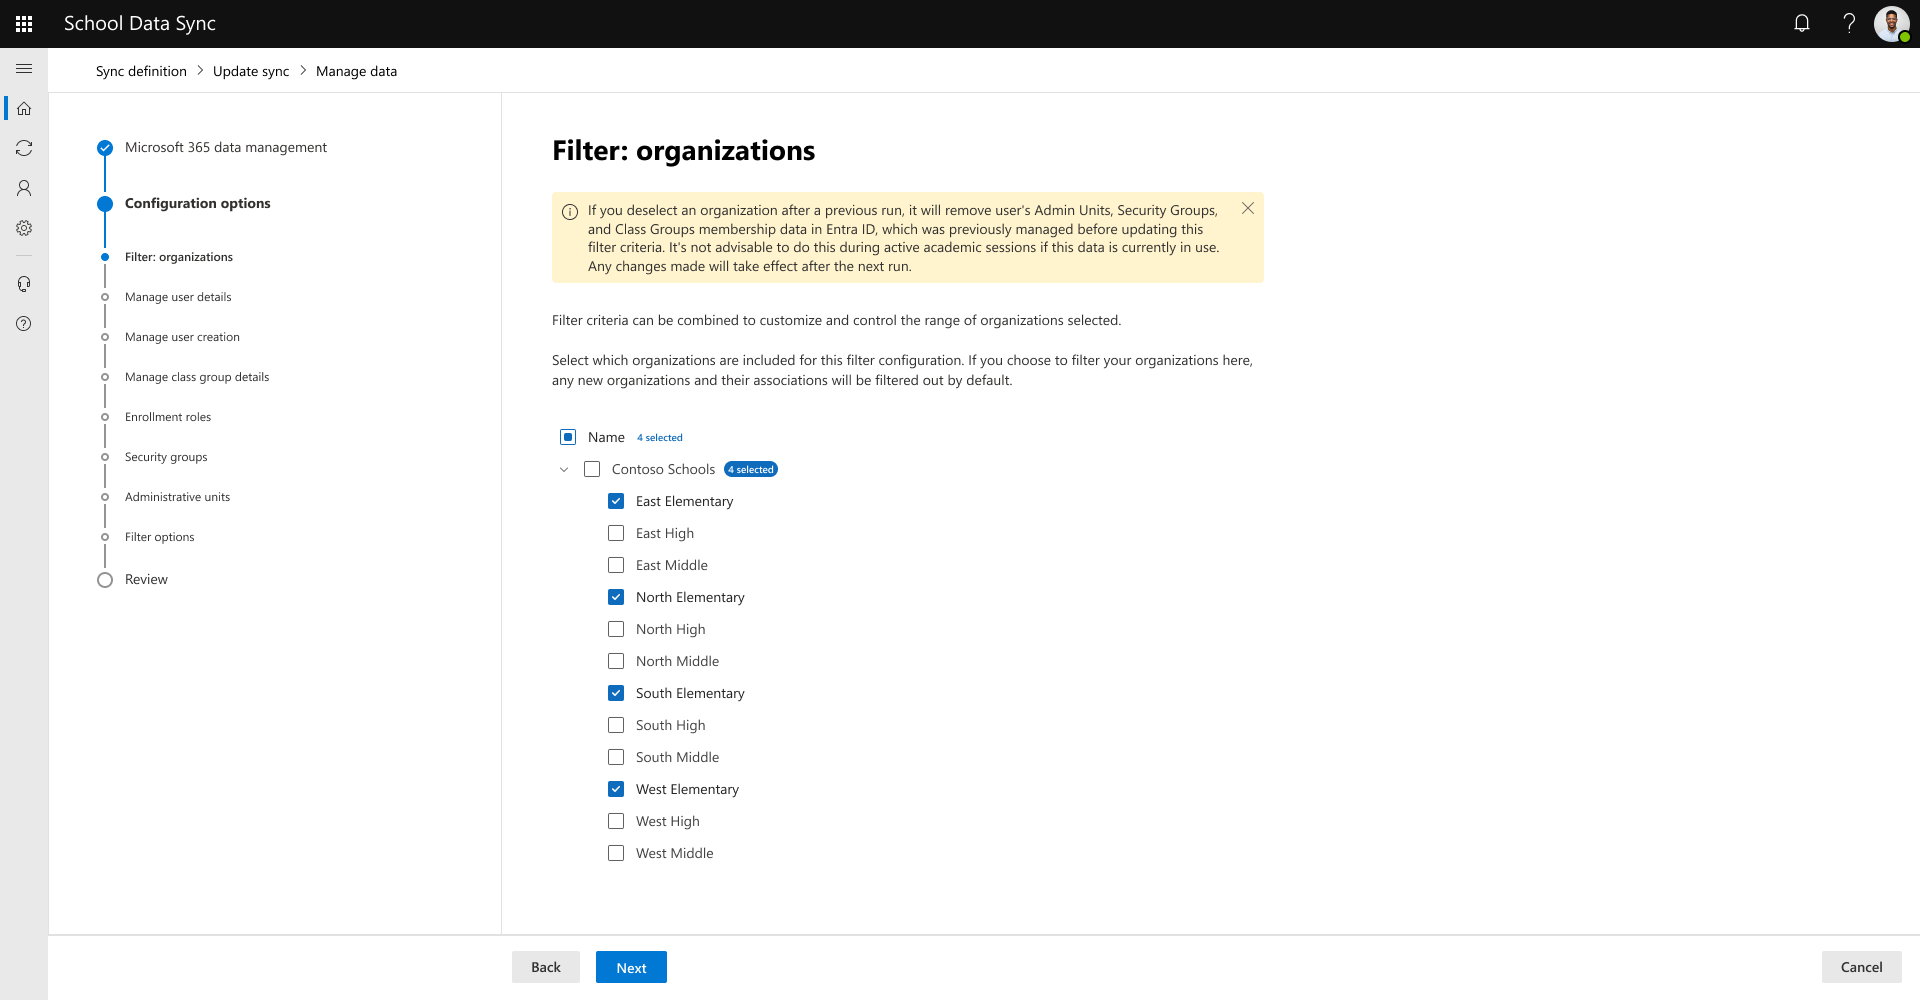 Screenshot that shows initial edit experience for filter by organizations.